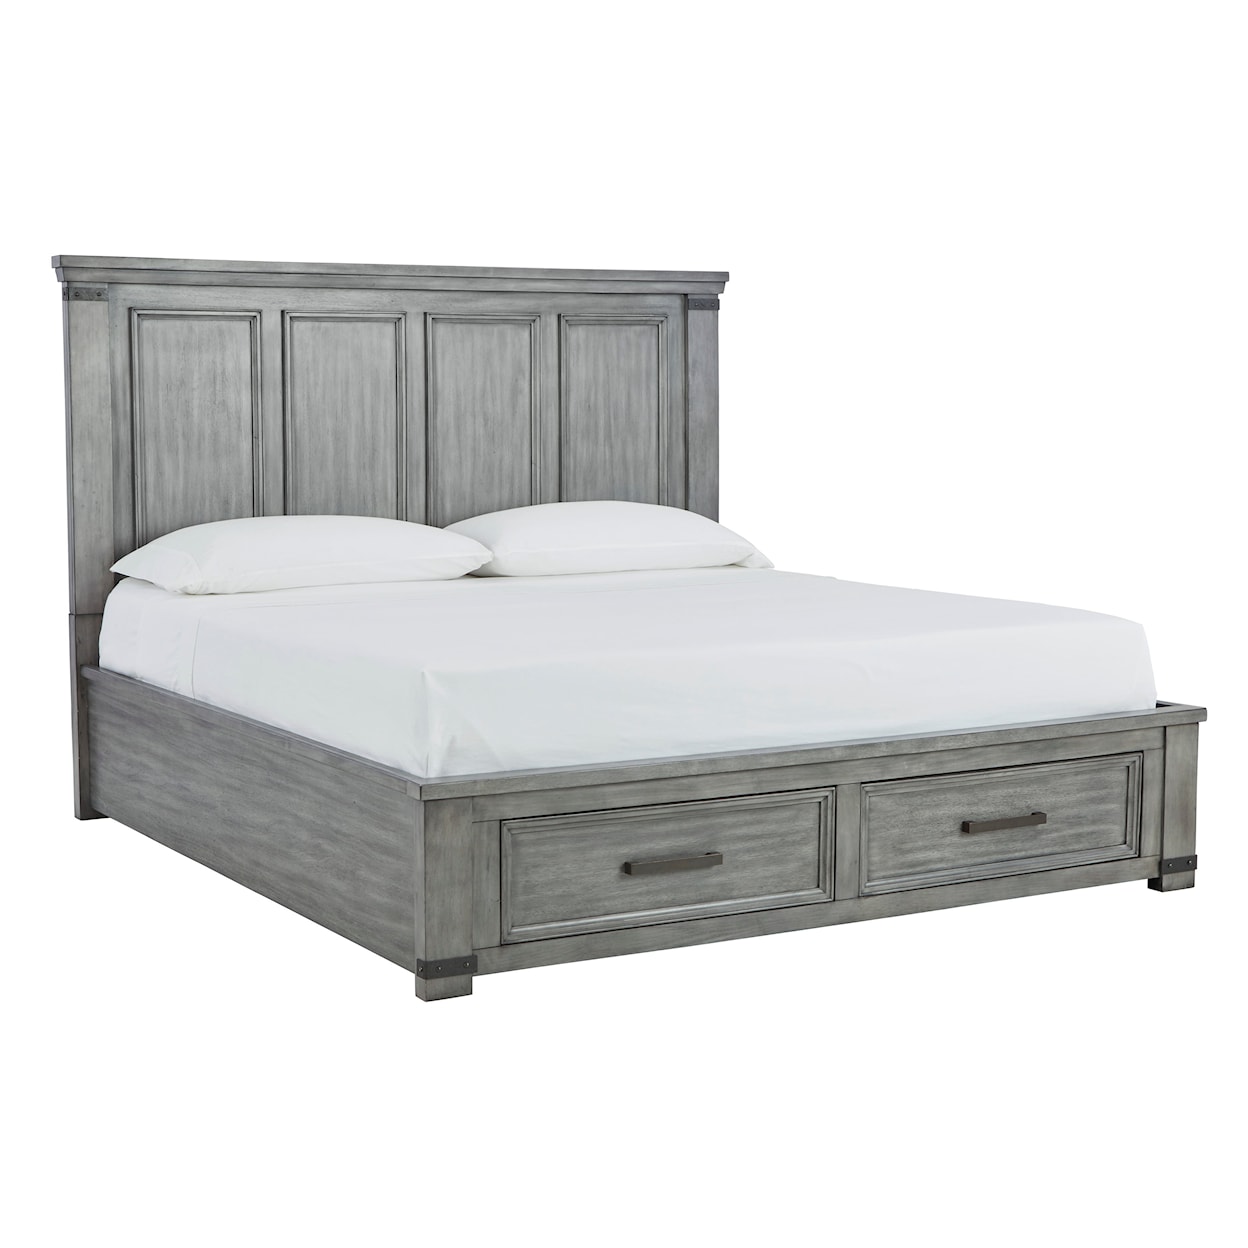 Benchcraft Russelyn King Storage Bed